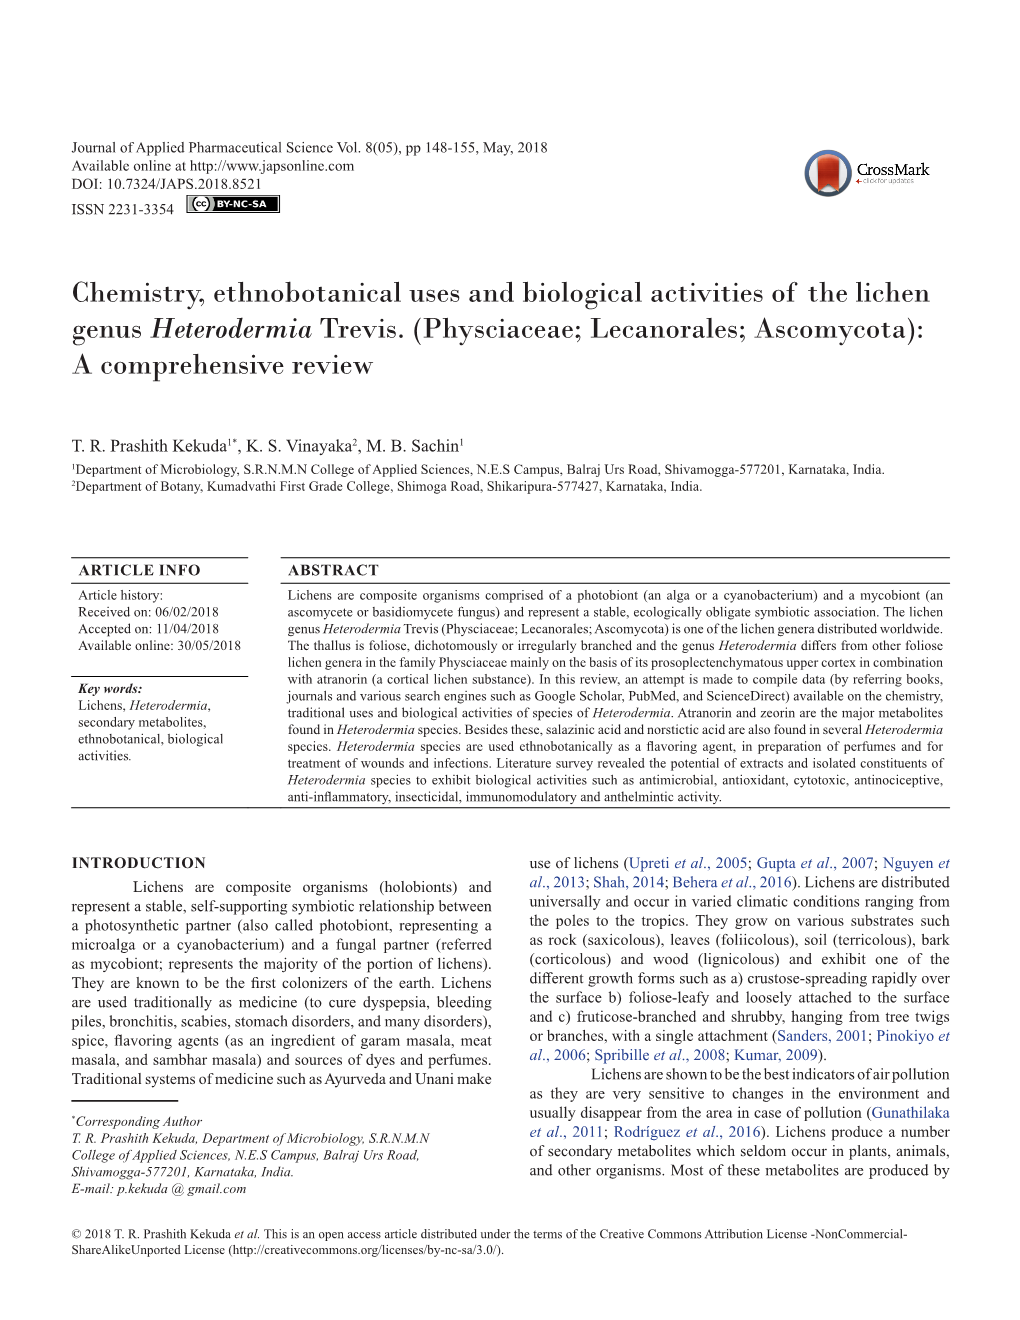 Chemistry, Ethnobotanical Uses and Biological Activities of the Lichen Genus Heterodermia Trevis